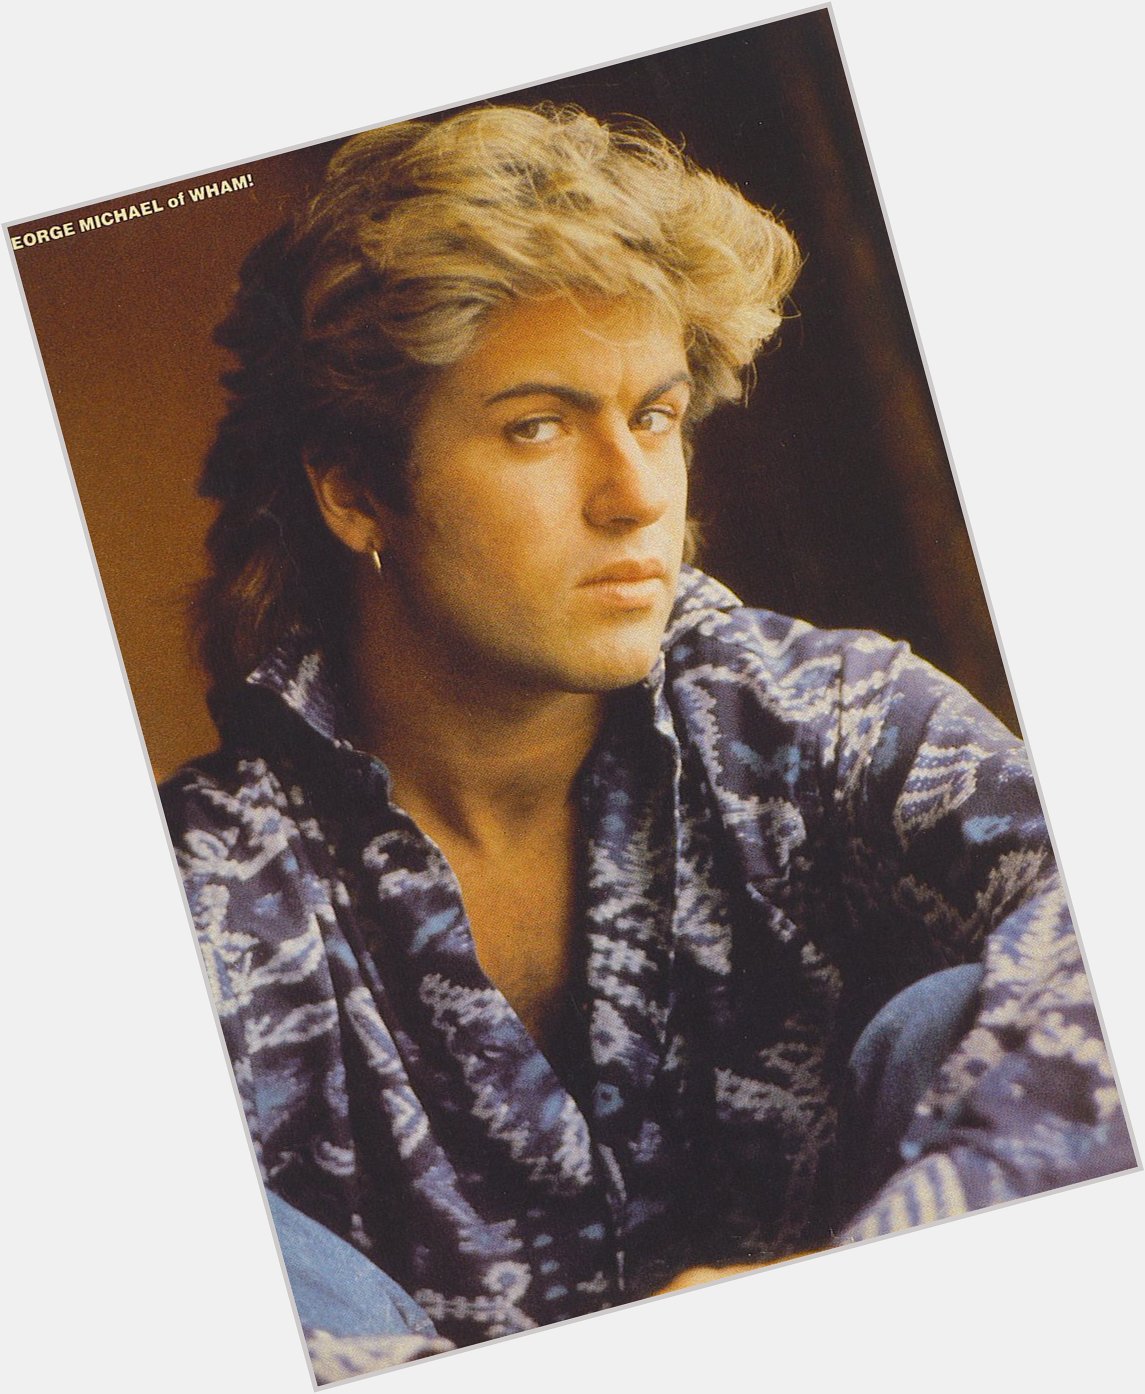 Gn and happy birthday to george michael, a true icon 